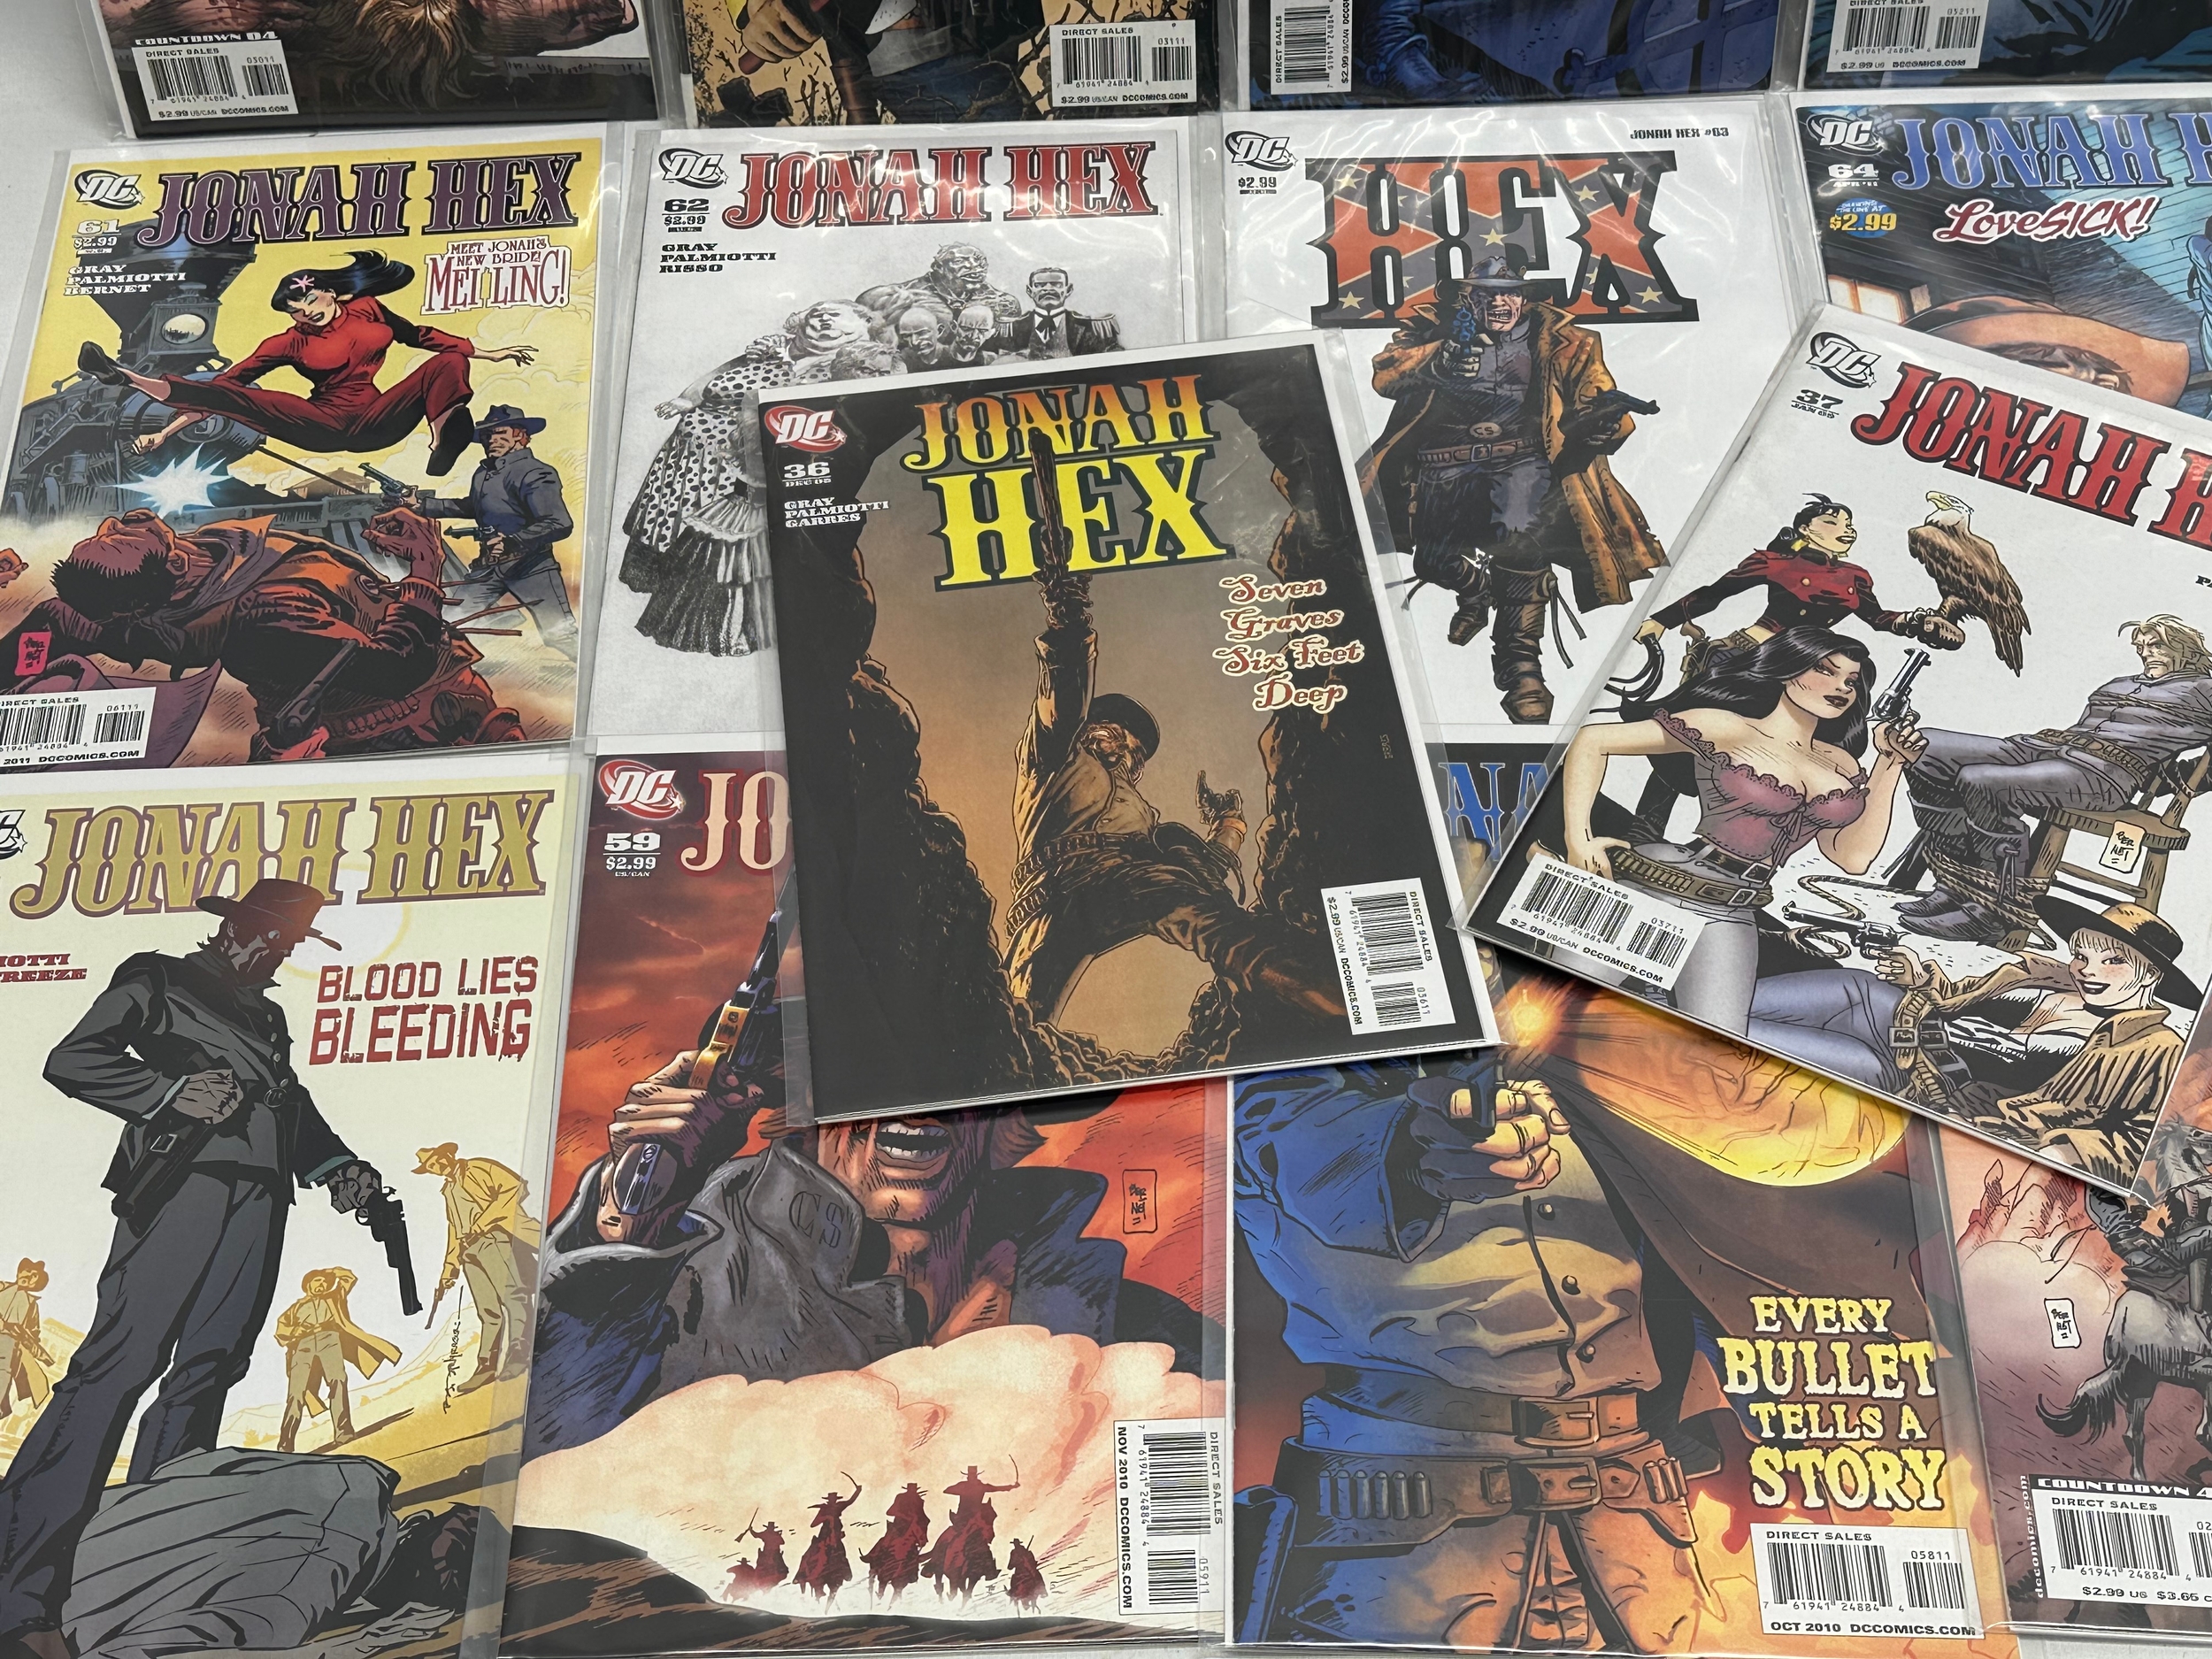 A collection of DC Jonah Hex comics. - Image 4 of 4